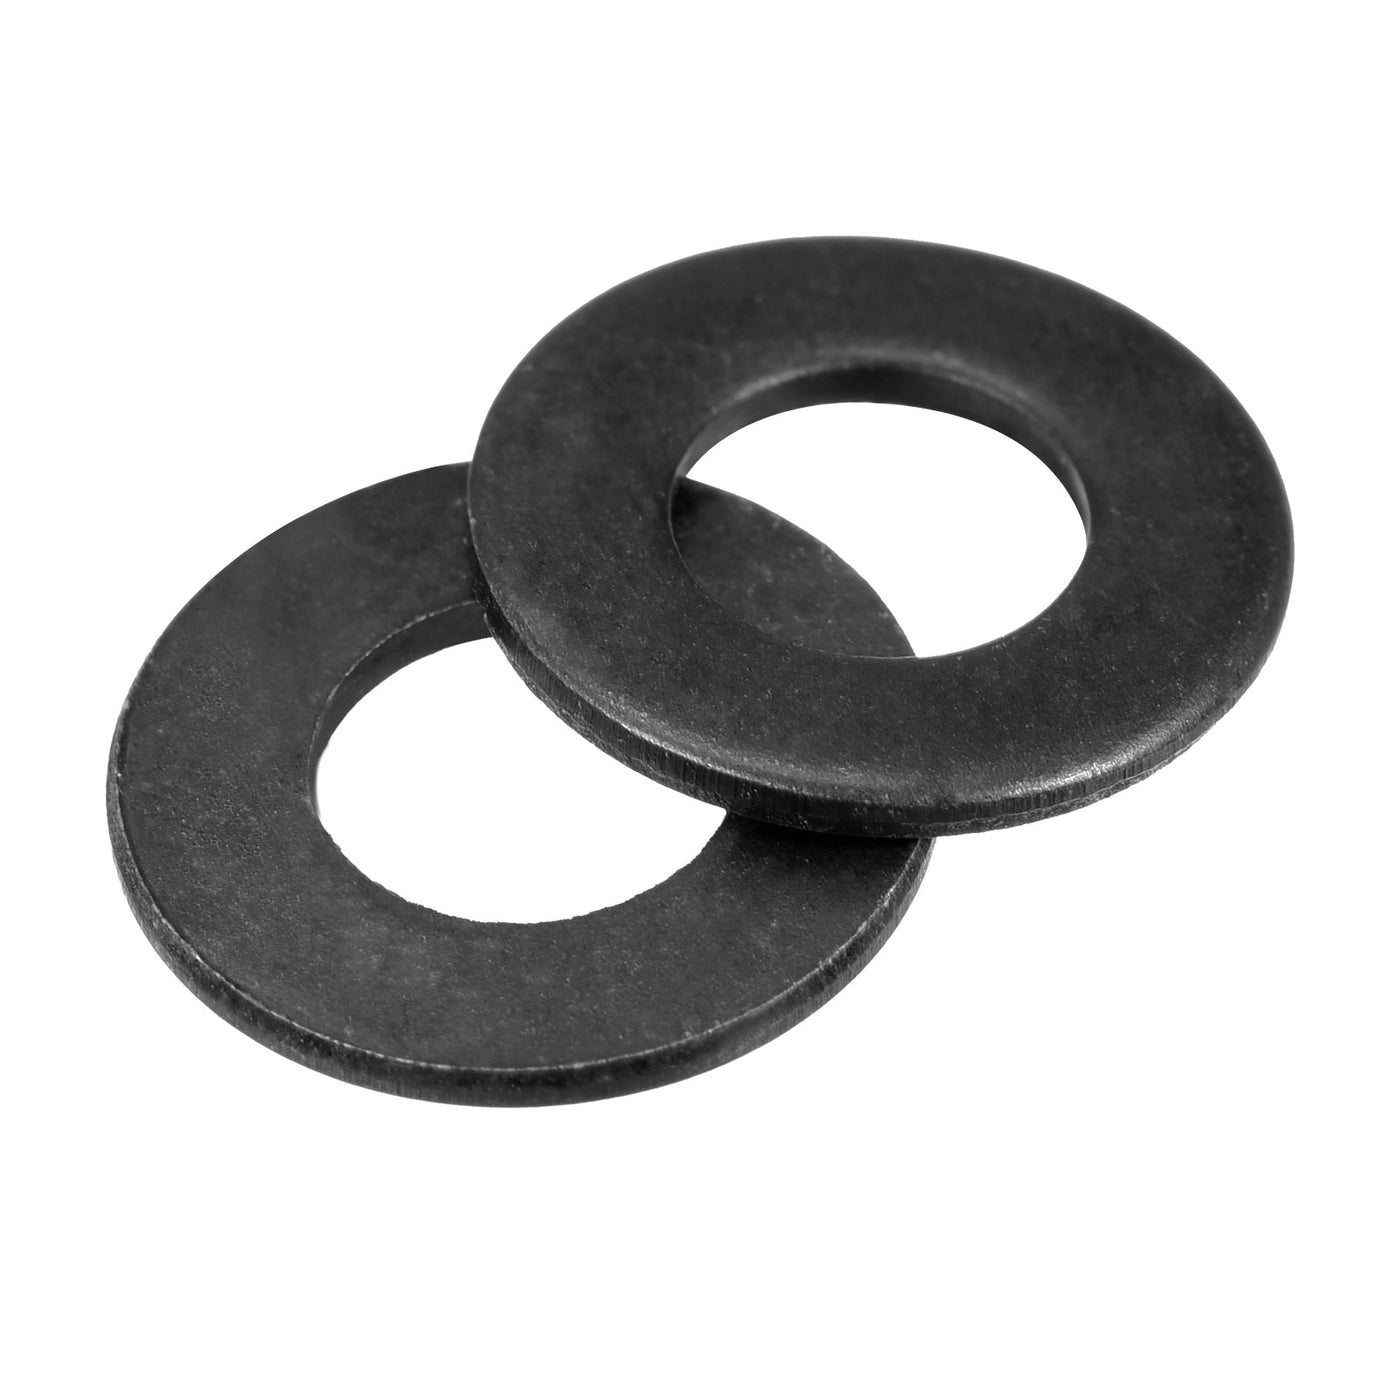 uxcell Uxcell 5/16-Inch Flat Washer, Alloy Steel Black Oxide Finish Pack of 100